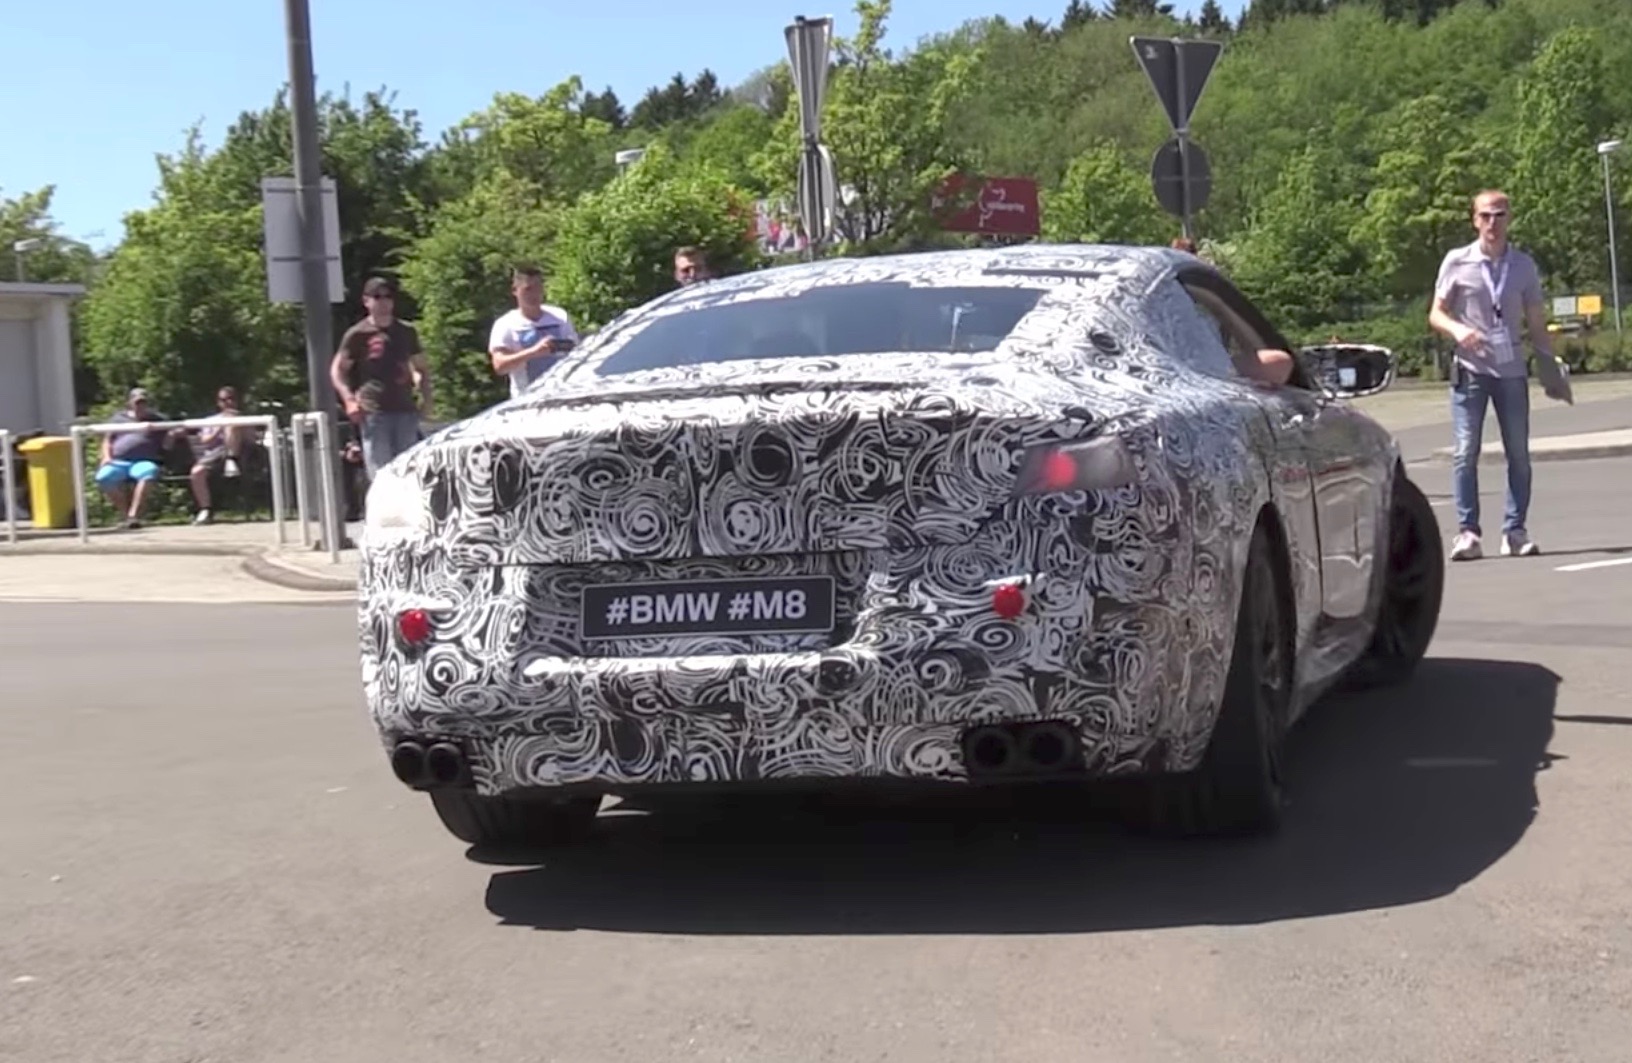 BMW M8 exhaust noise captured for first time, sounds meaty (video)